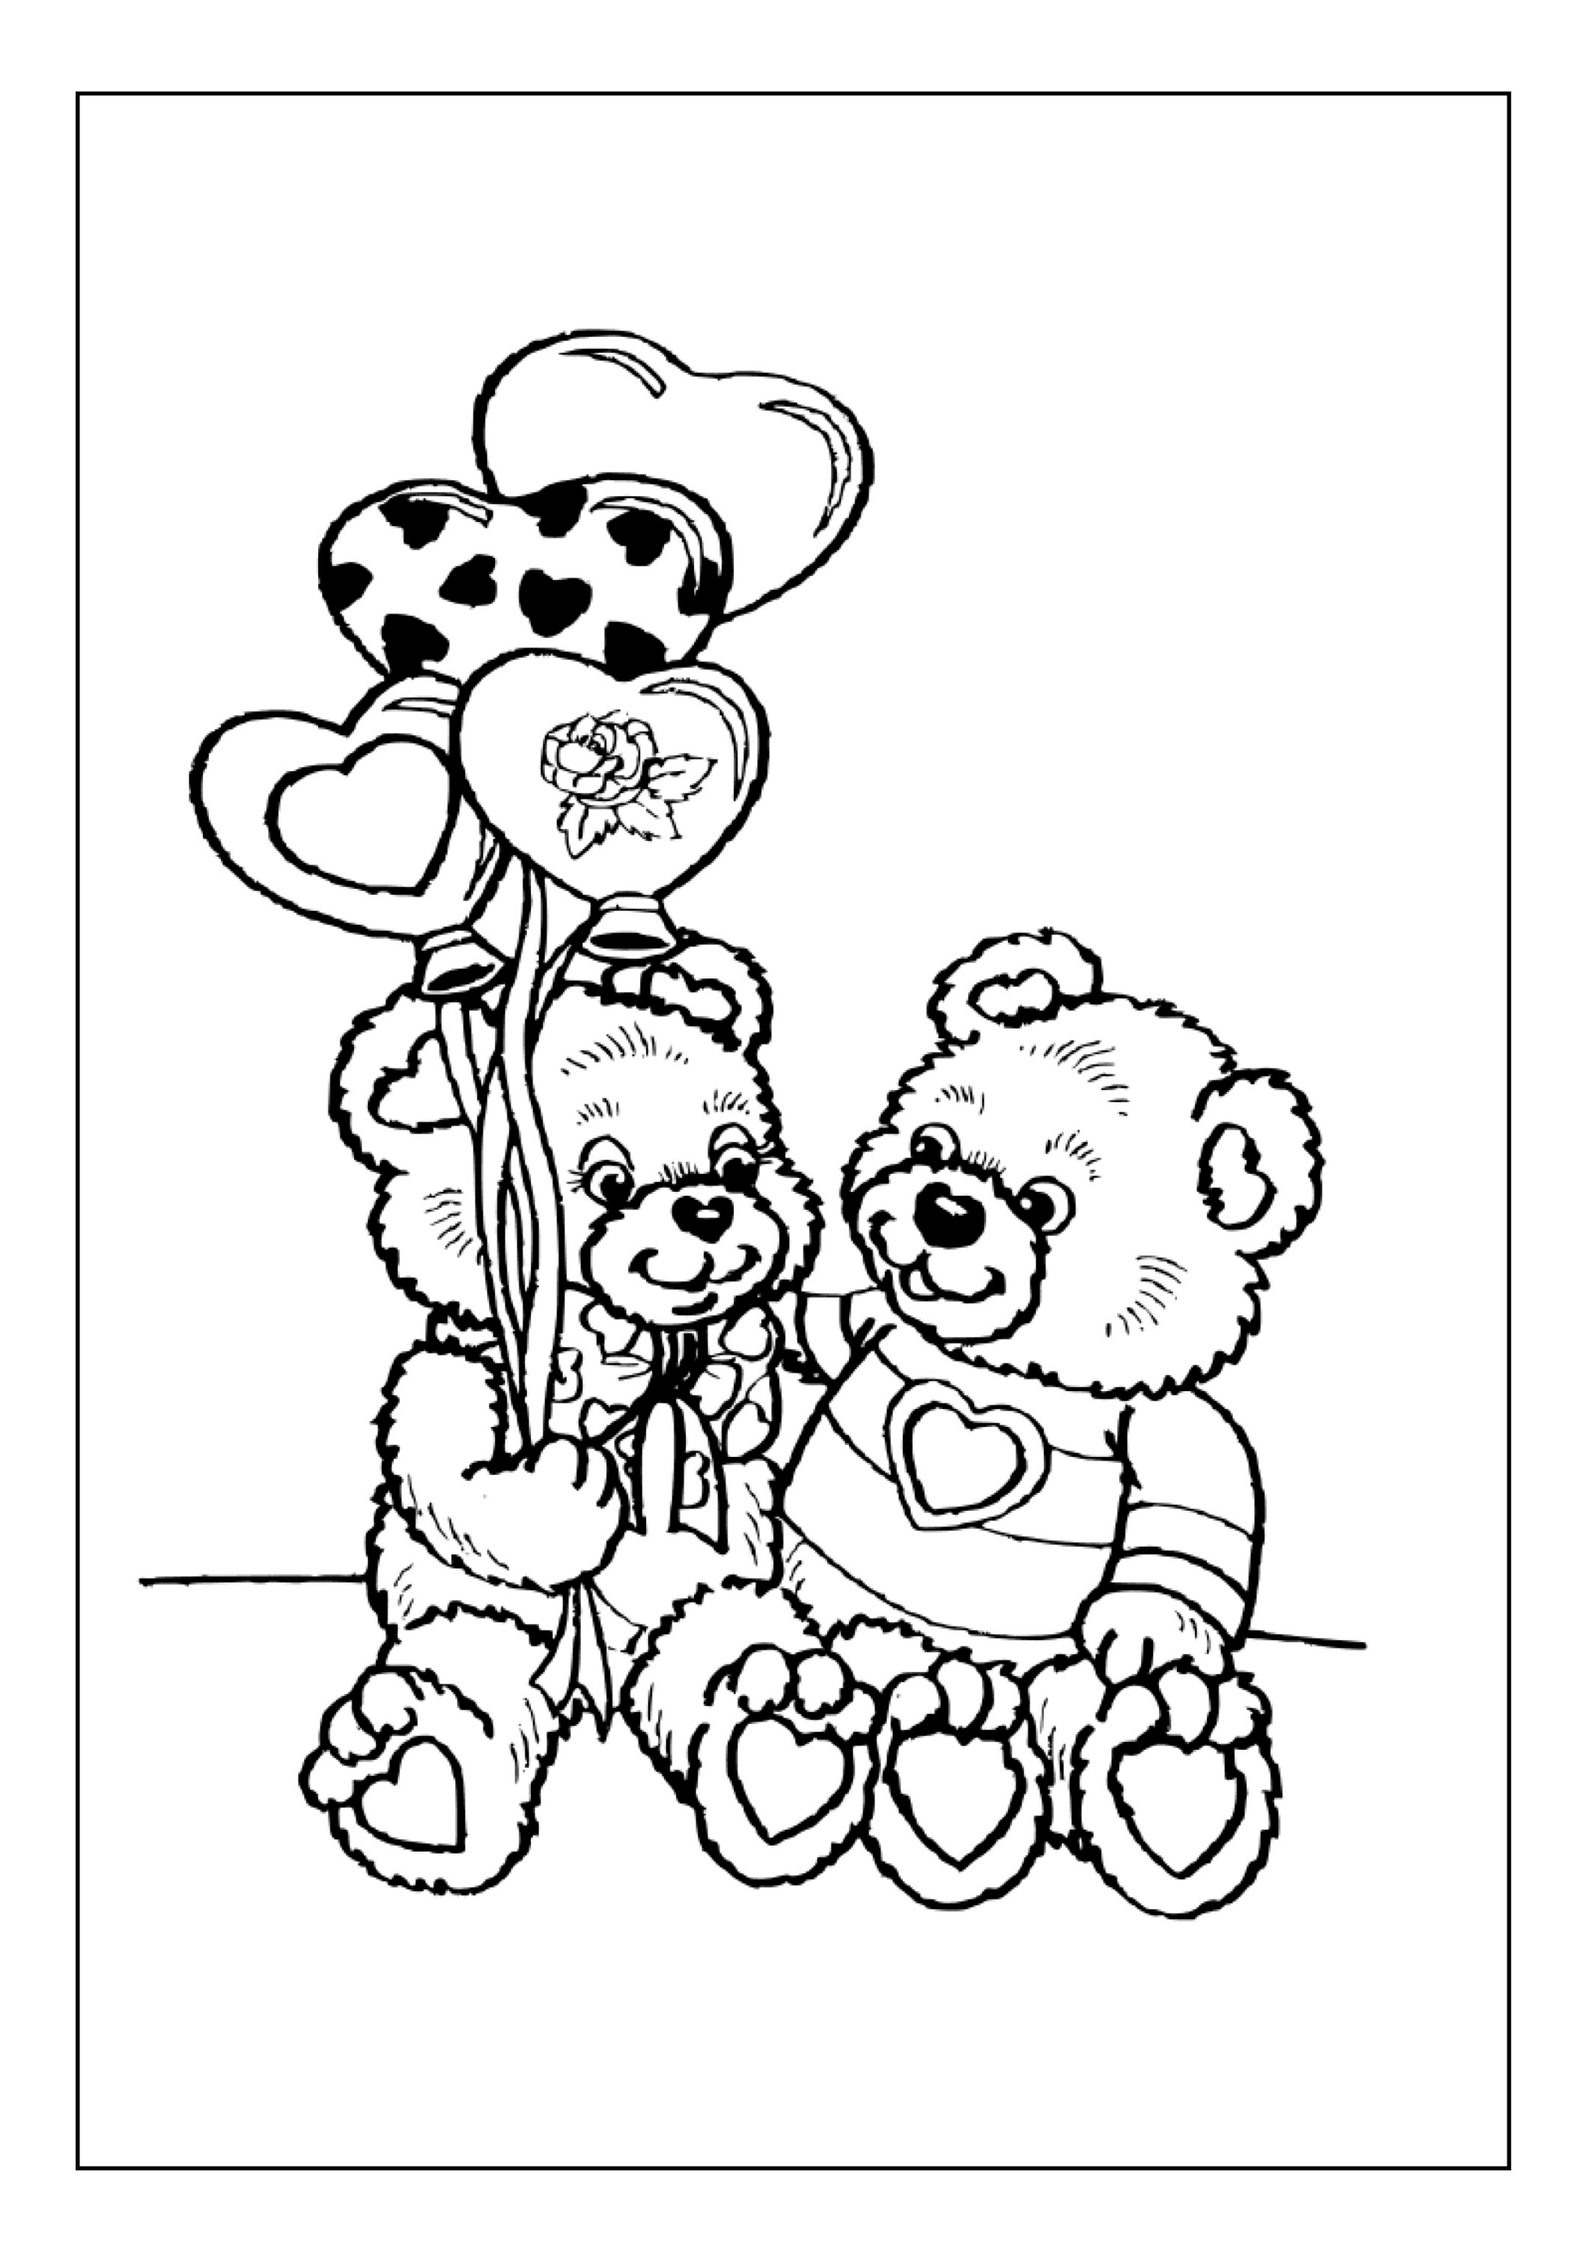 Printable Teddy Bear Coloring Pages for Kids and Adults 90 Pages ...